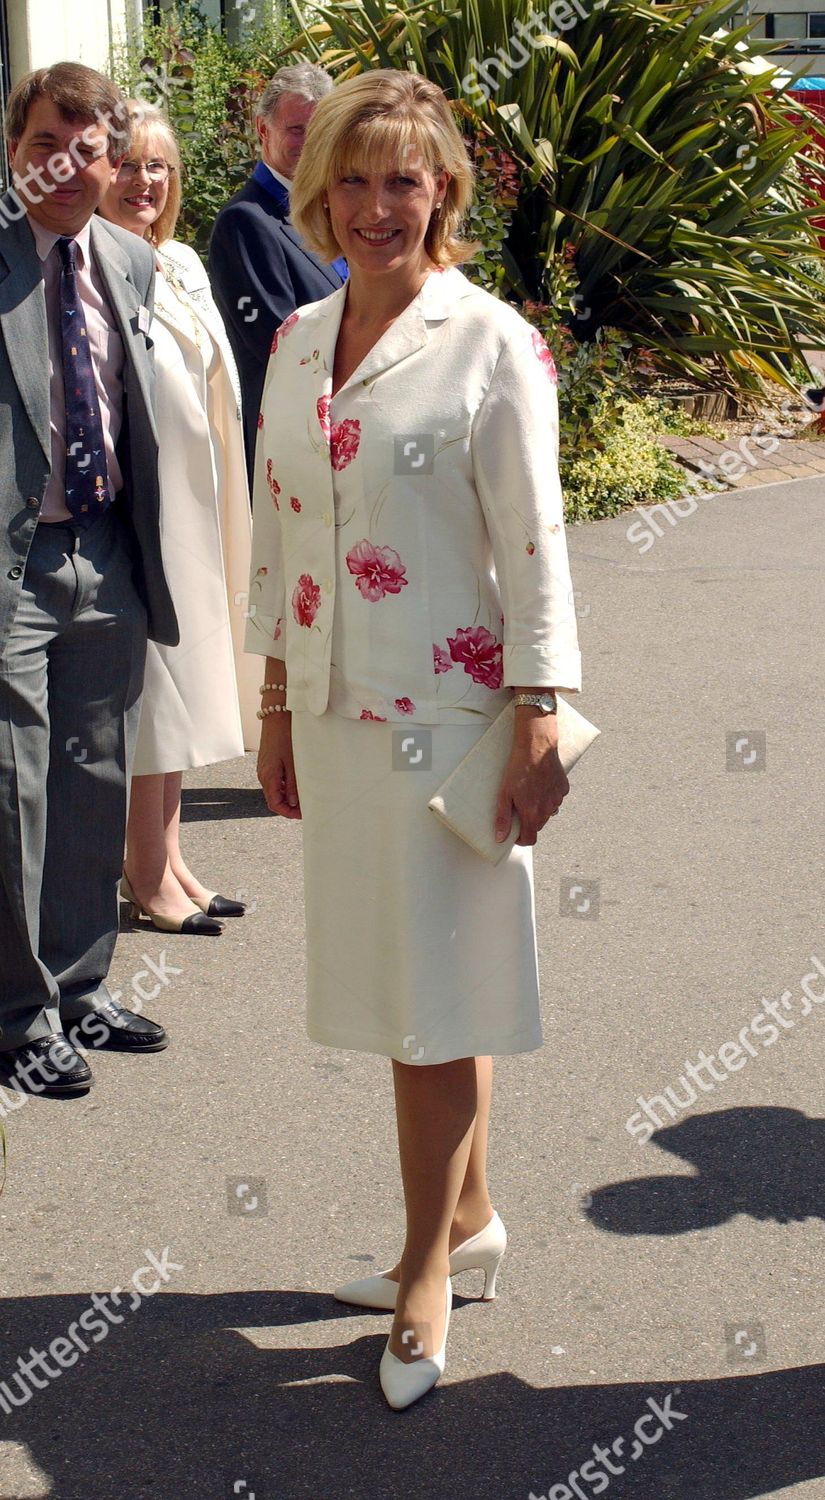 sophie-countess-of-wessex-opening-patient-resource-centre-at-frimley-park-hospital-britain-shutterstock-editorial-421874c.jpg